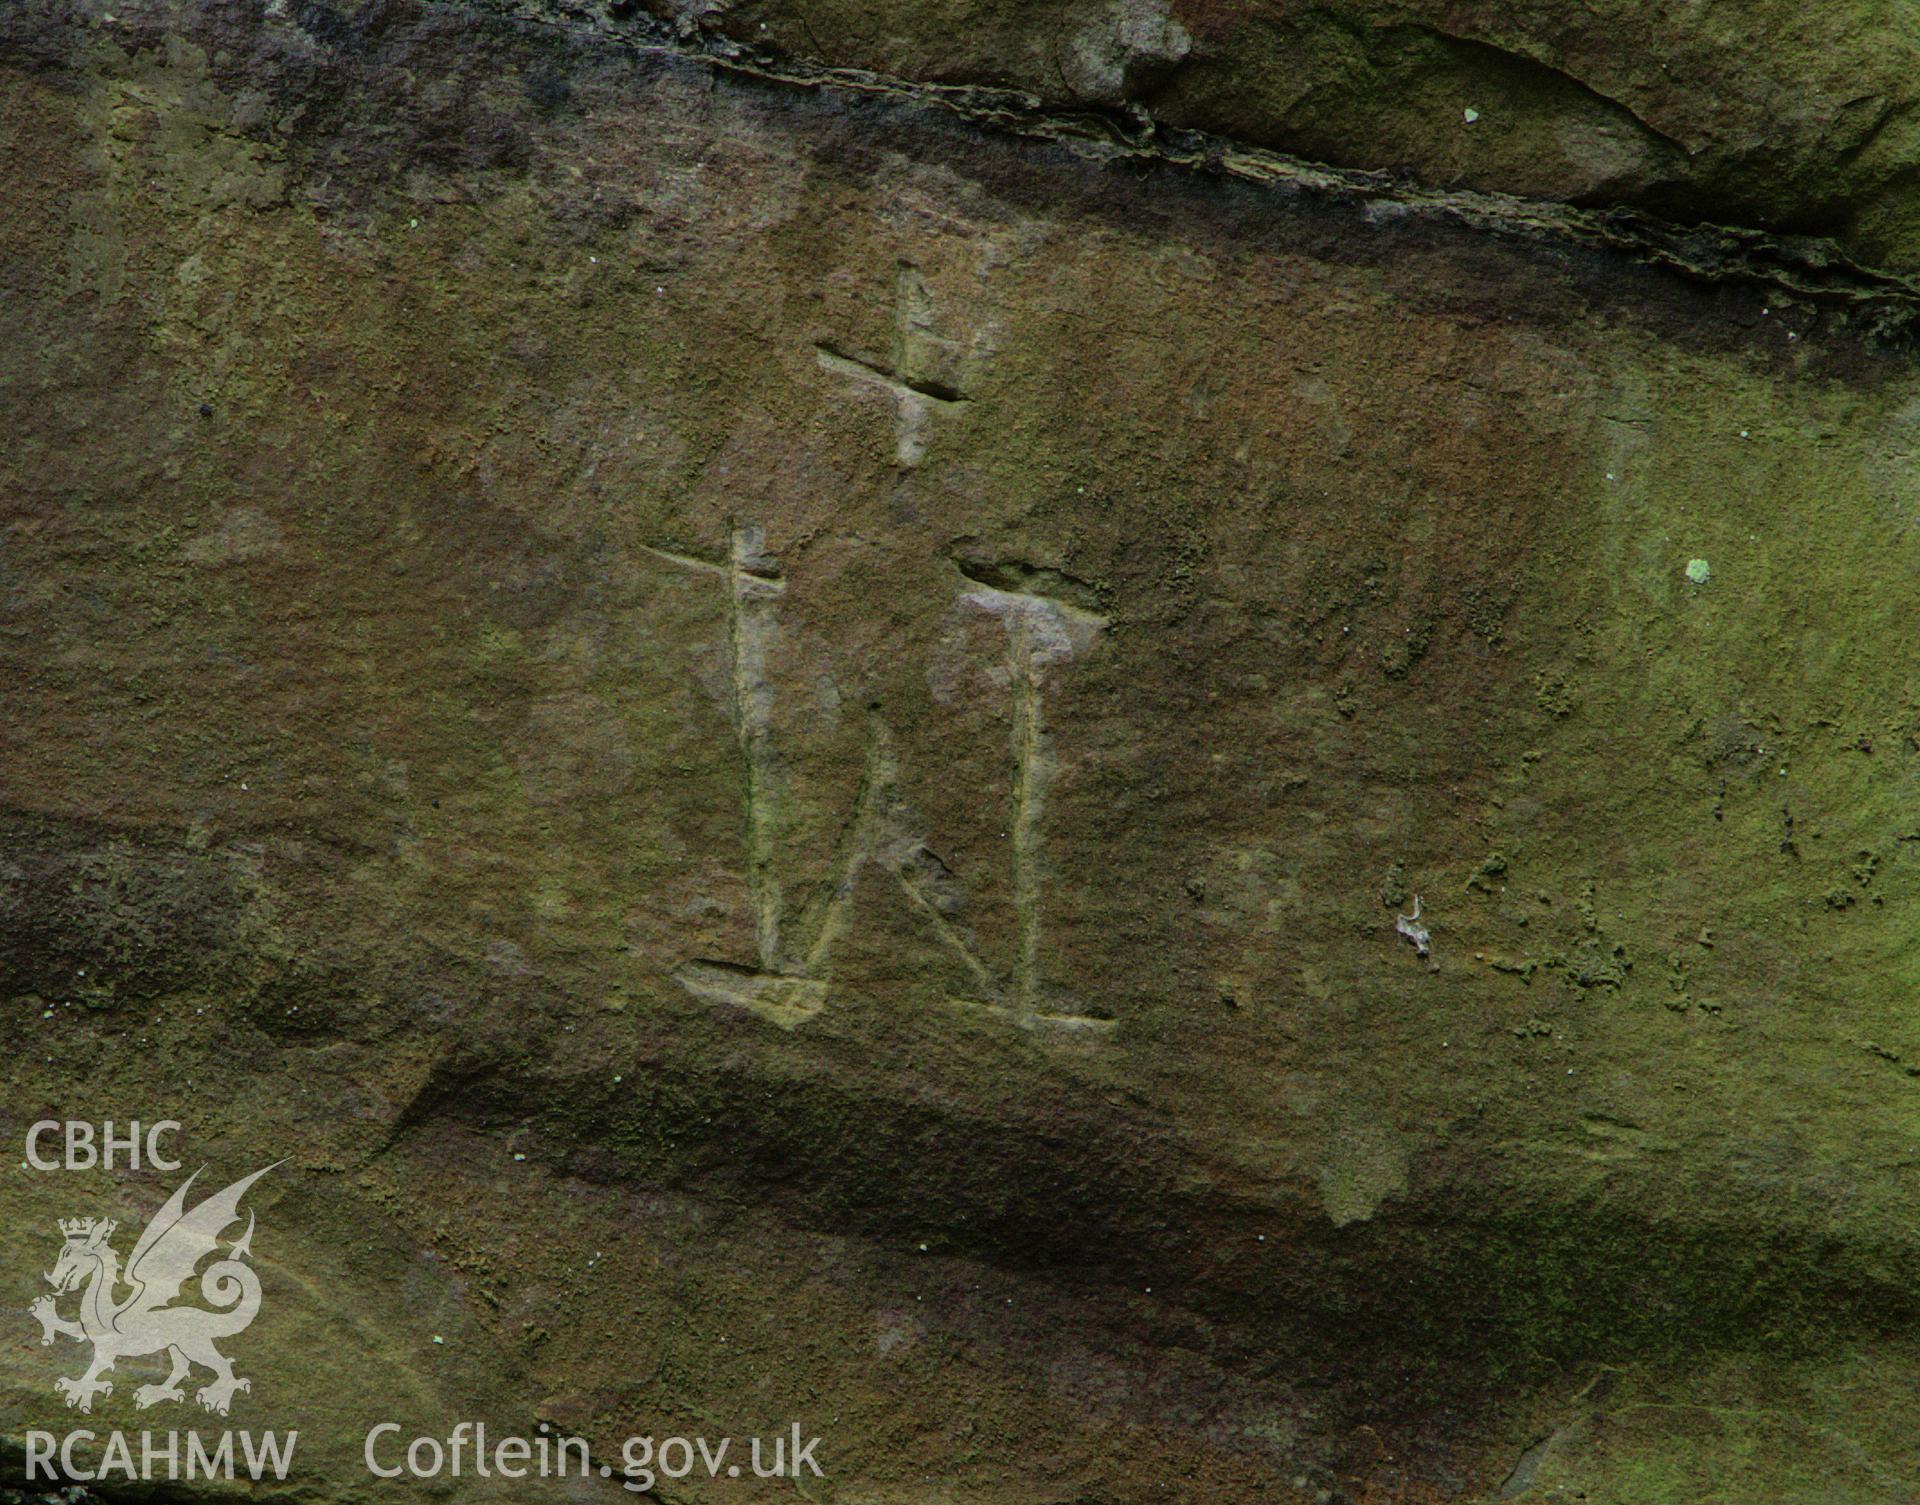 Colour photo showing mason's marks on the stone piers of the viaduct, taken by Mark Evans, January 2017.